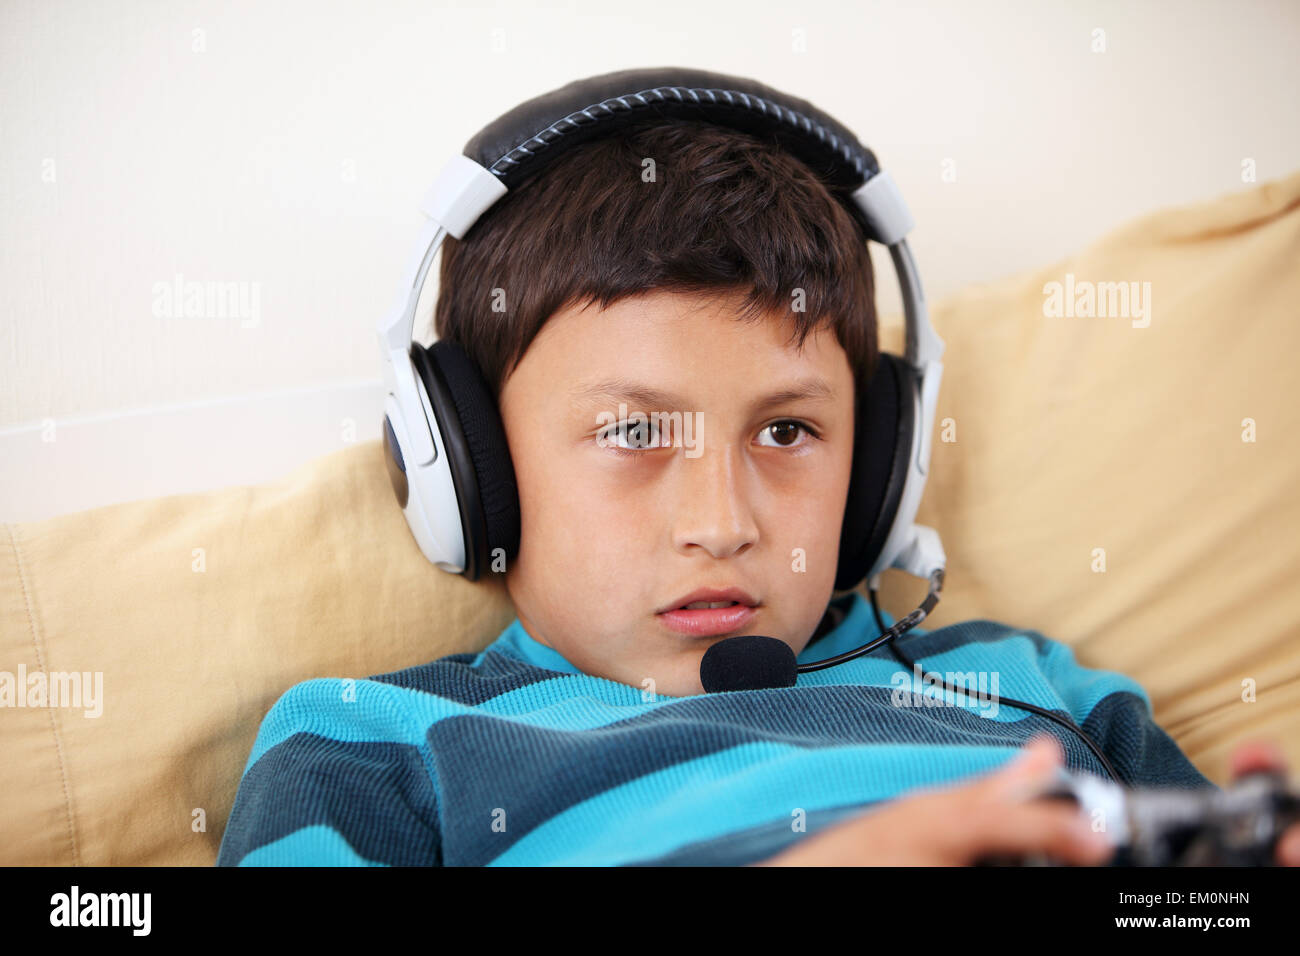 Young boy concentrating on playing video game with his friends with headset and microphone with copy space Stock Photo